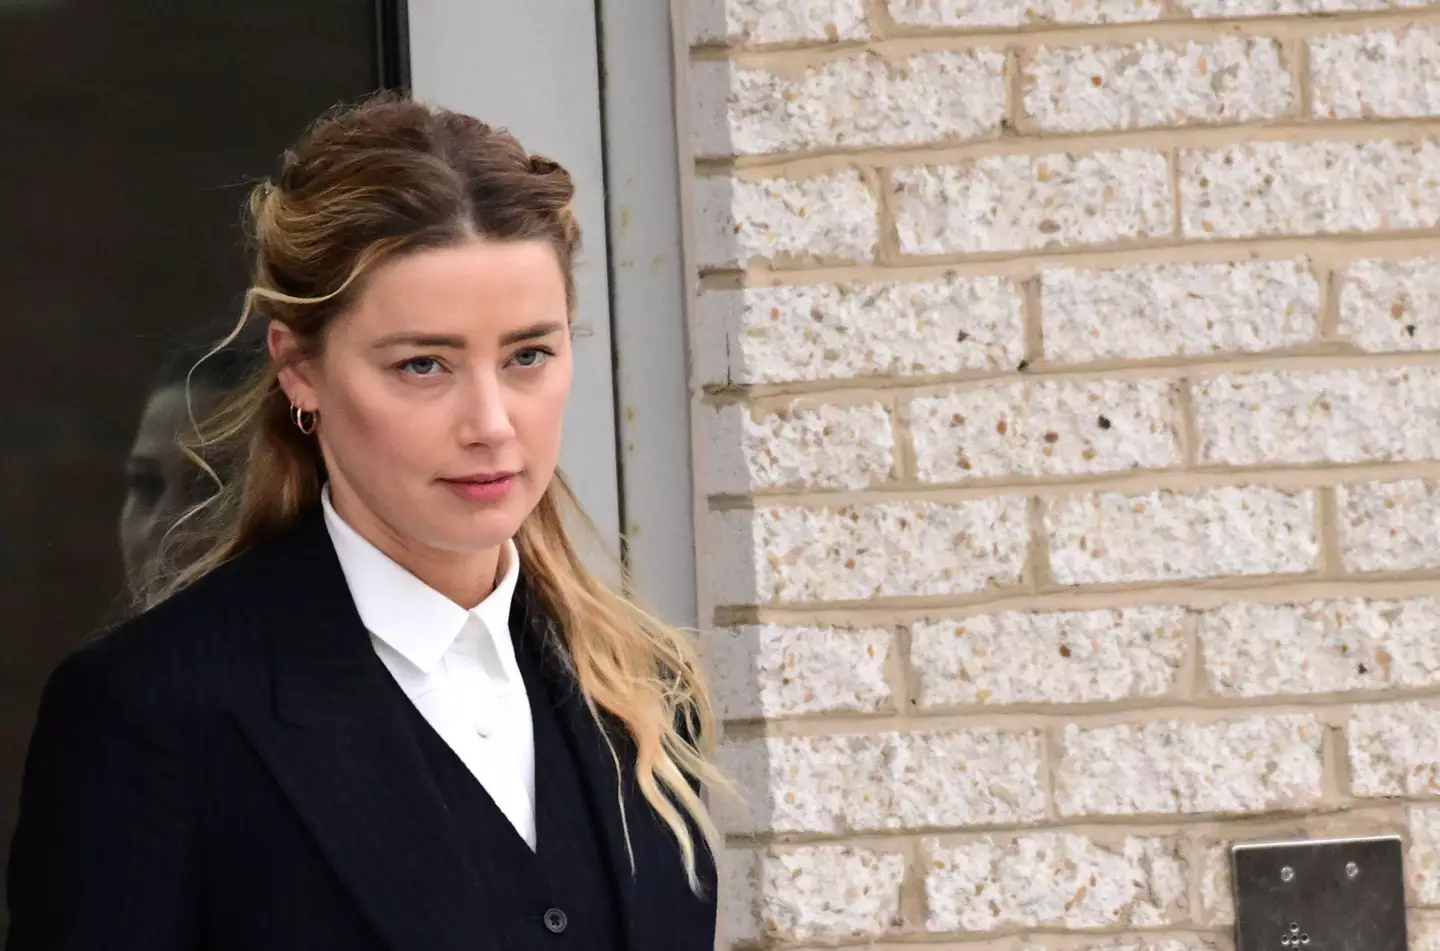 Psychologist Dr Shannon Curry has revealed her diagnosis of Amber Heard.